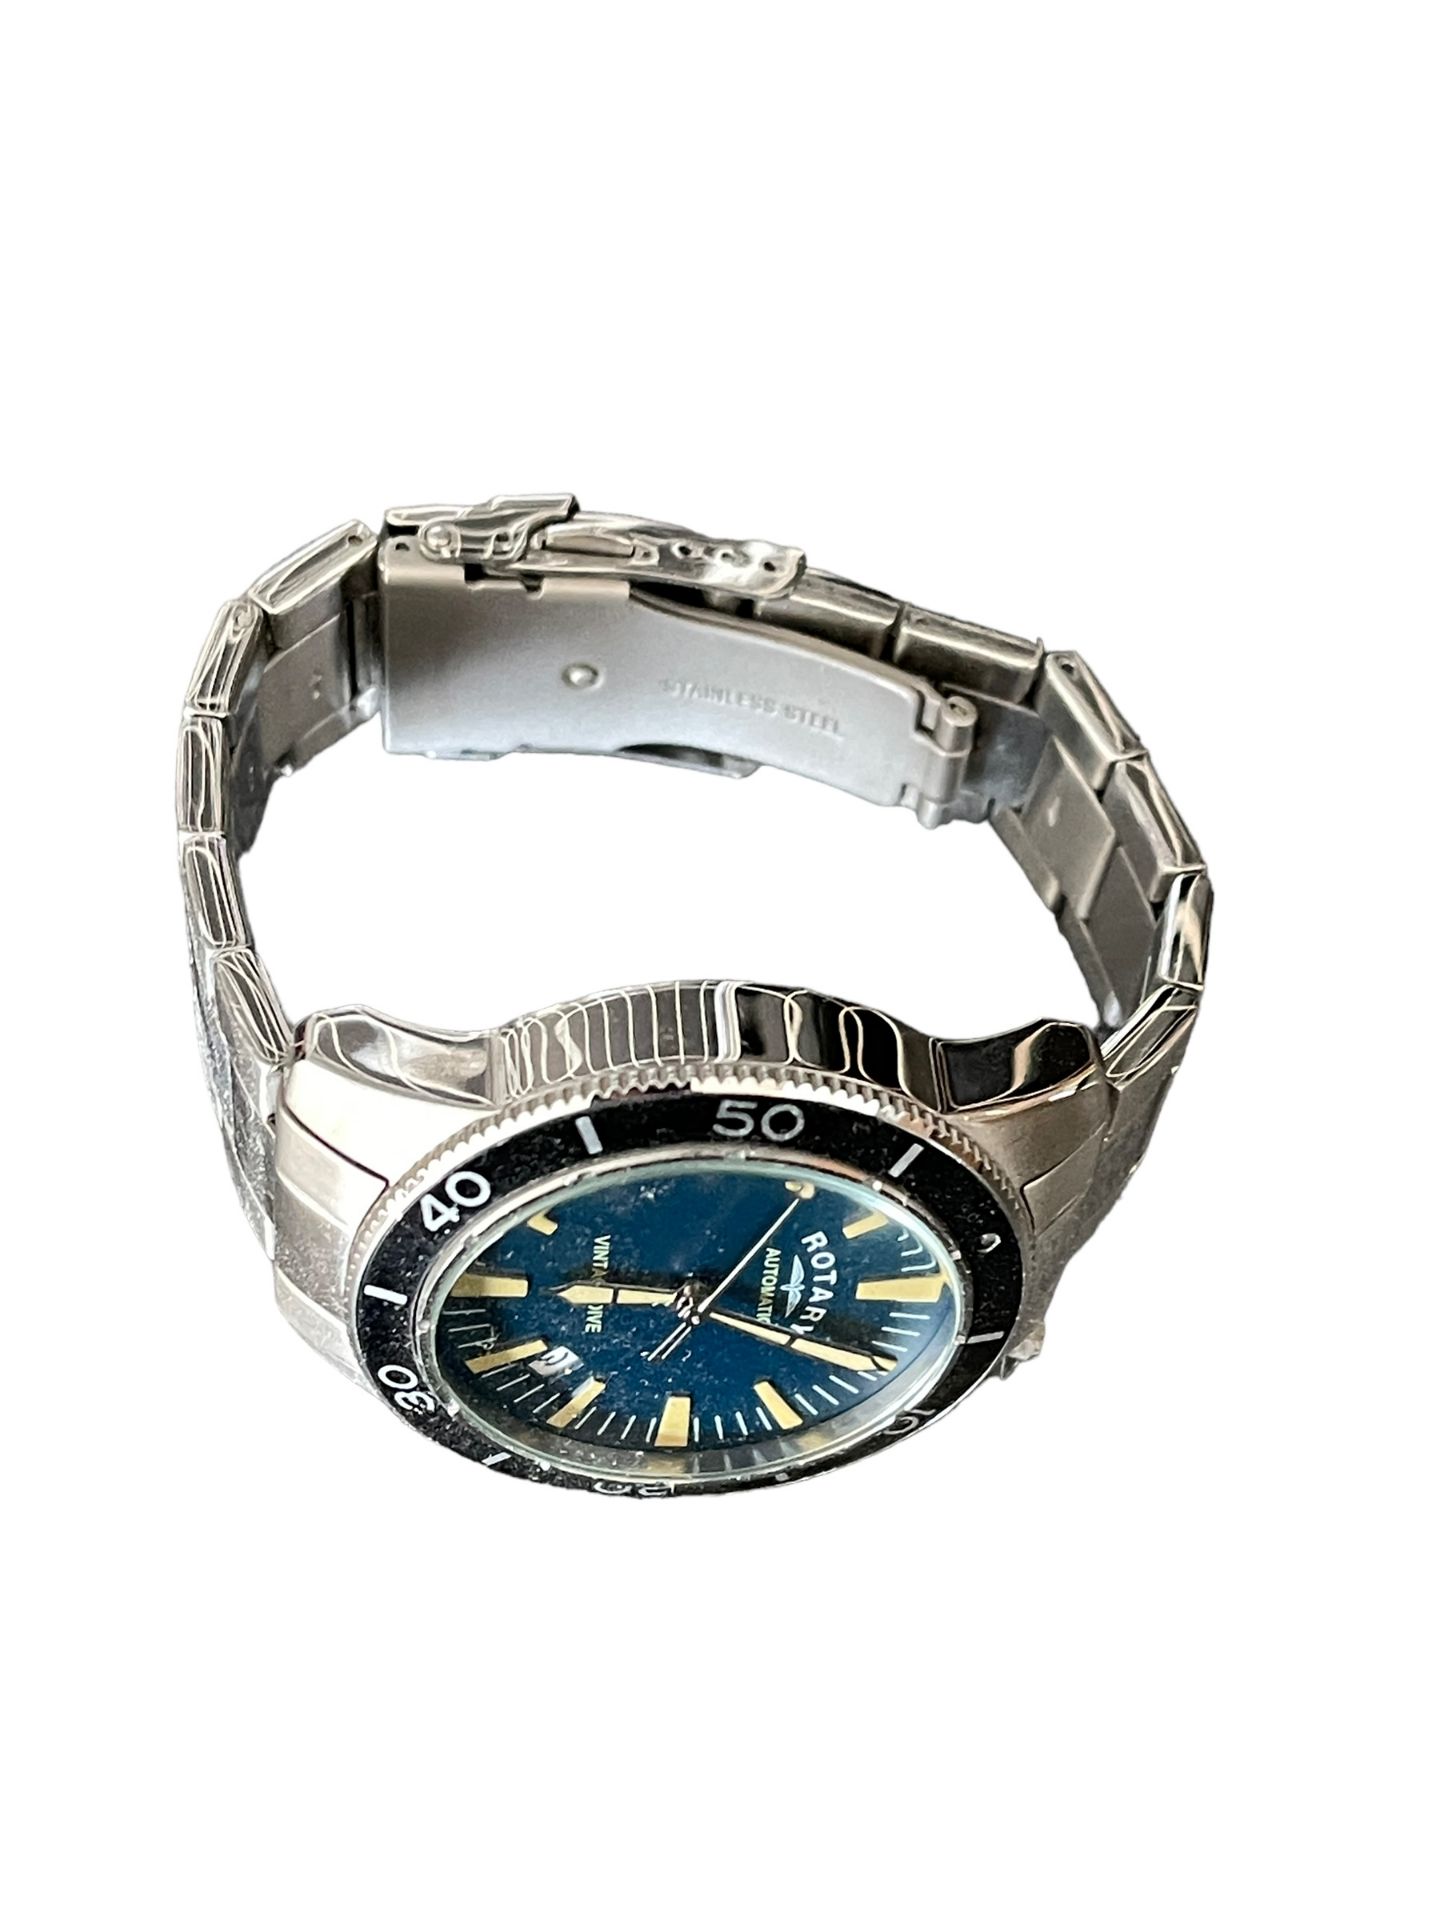 Rotary Divers Watch fully working with box paper bracelet stainless steel - Image 4 of 6